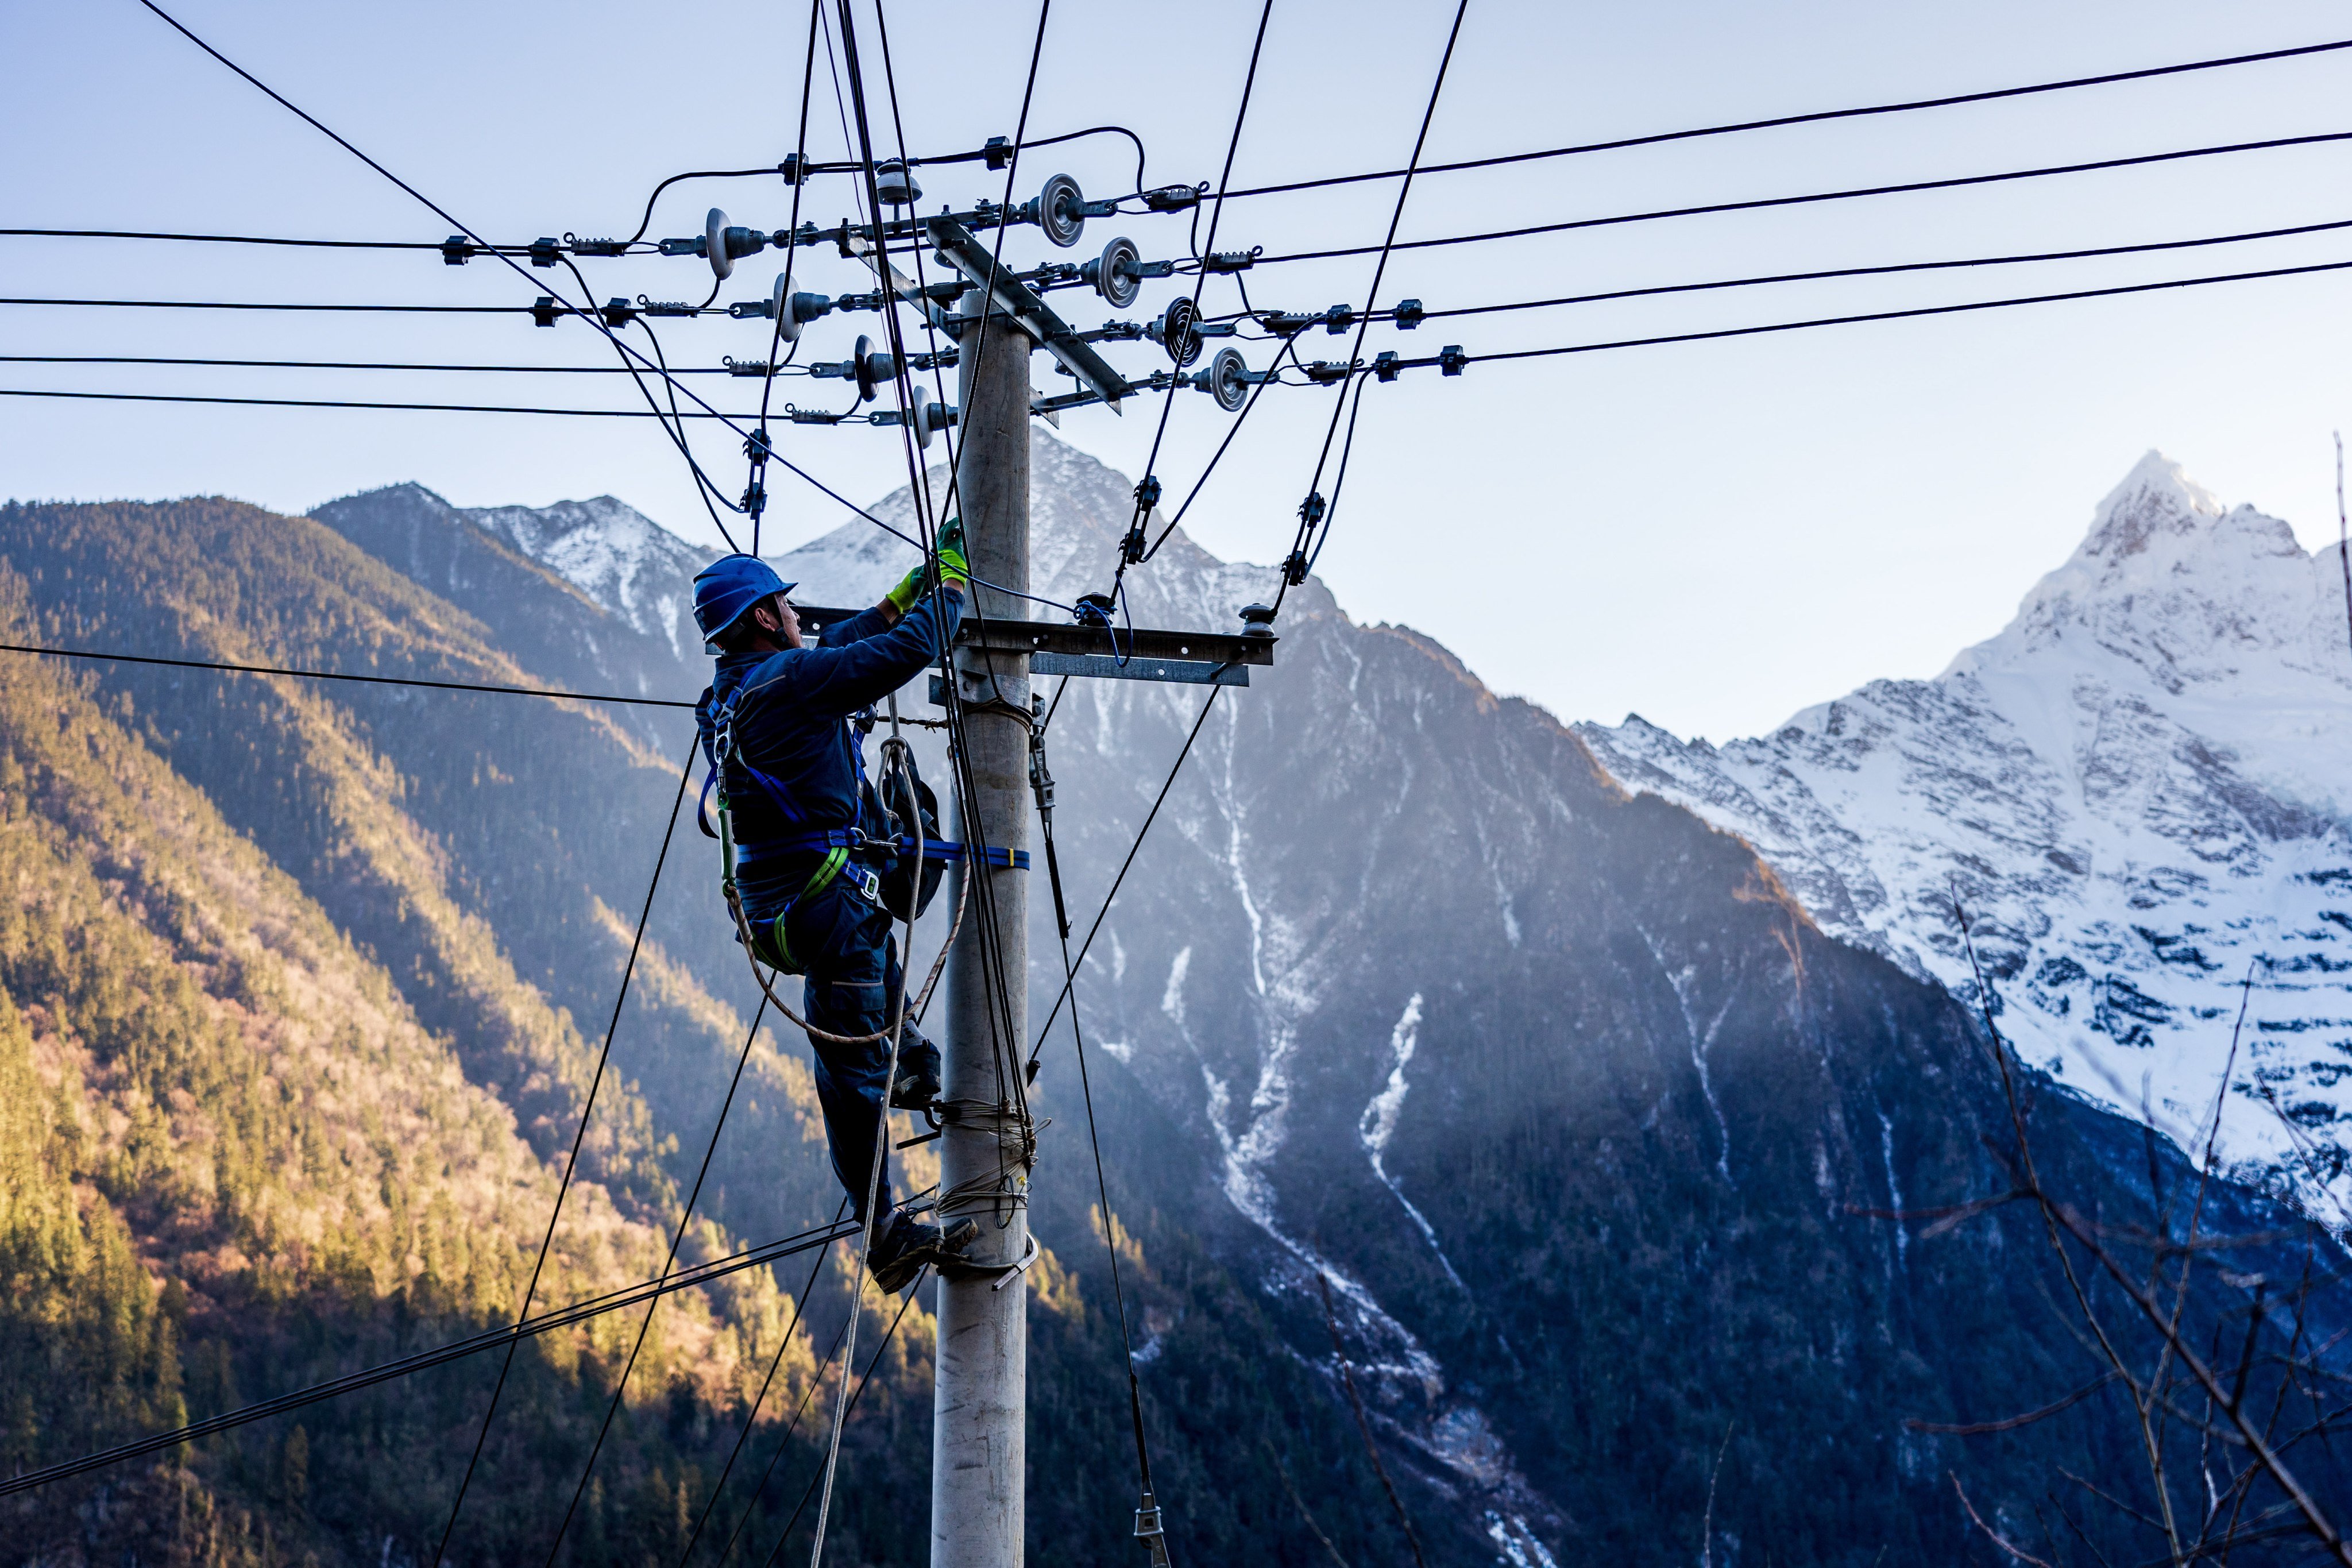 A China Southern Power Grid worker inspects transmission lines in Yubeng village, Deqen county, Yunnan province on January 9. The company recently agreed to buy  an Italian utility company’s Peruvian assets for US$2.9 billion, in what looks to be the biggest outbound deal of the year. Photo: EPA-EFE